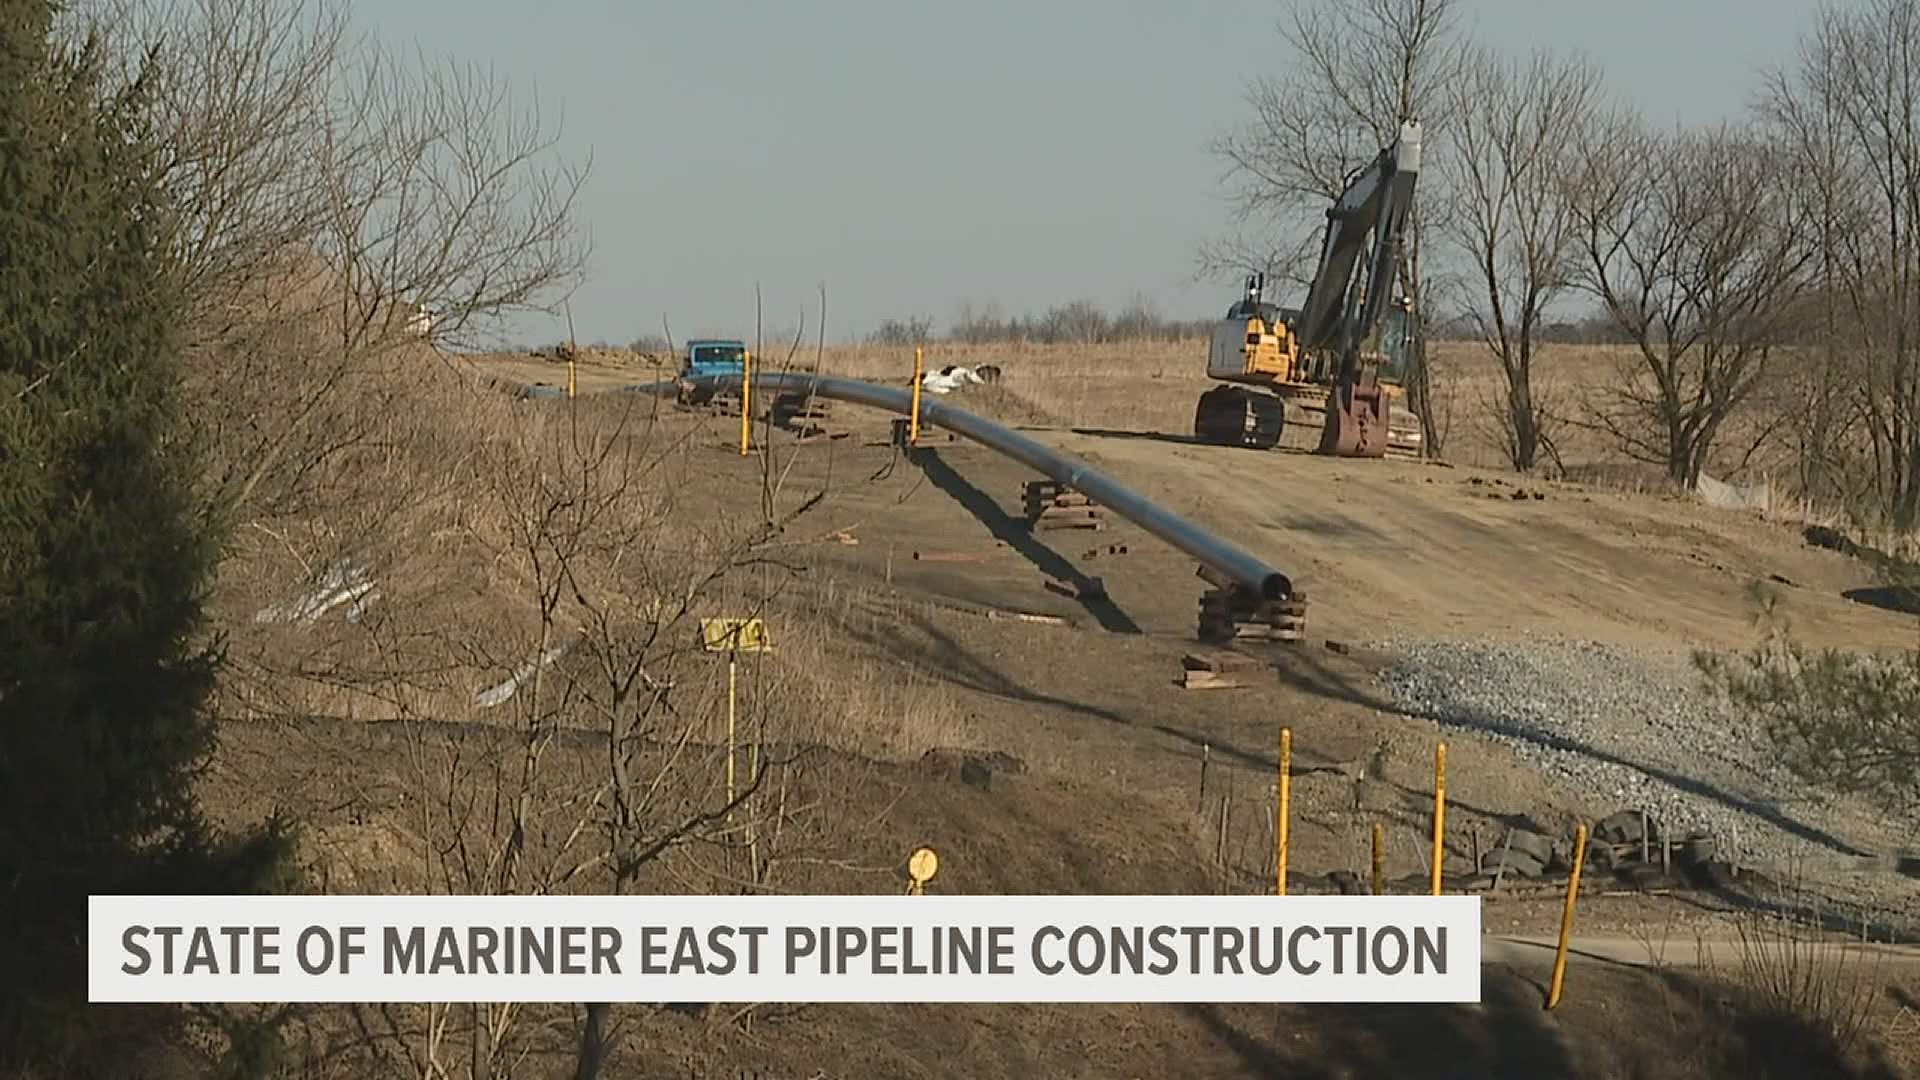 Pennsylvania's own major pipeline, Mariner East, continues to deal with its own struggles.